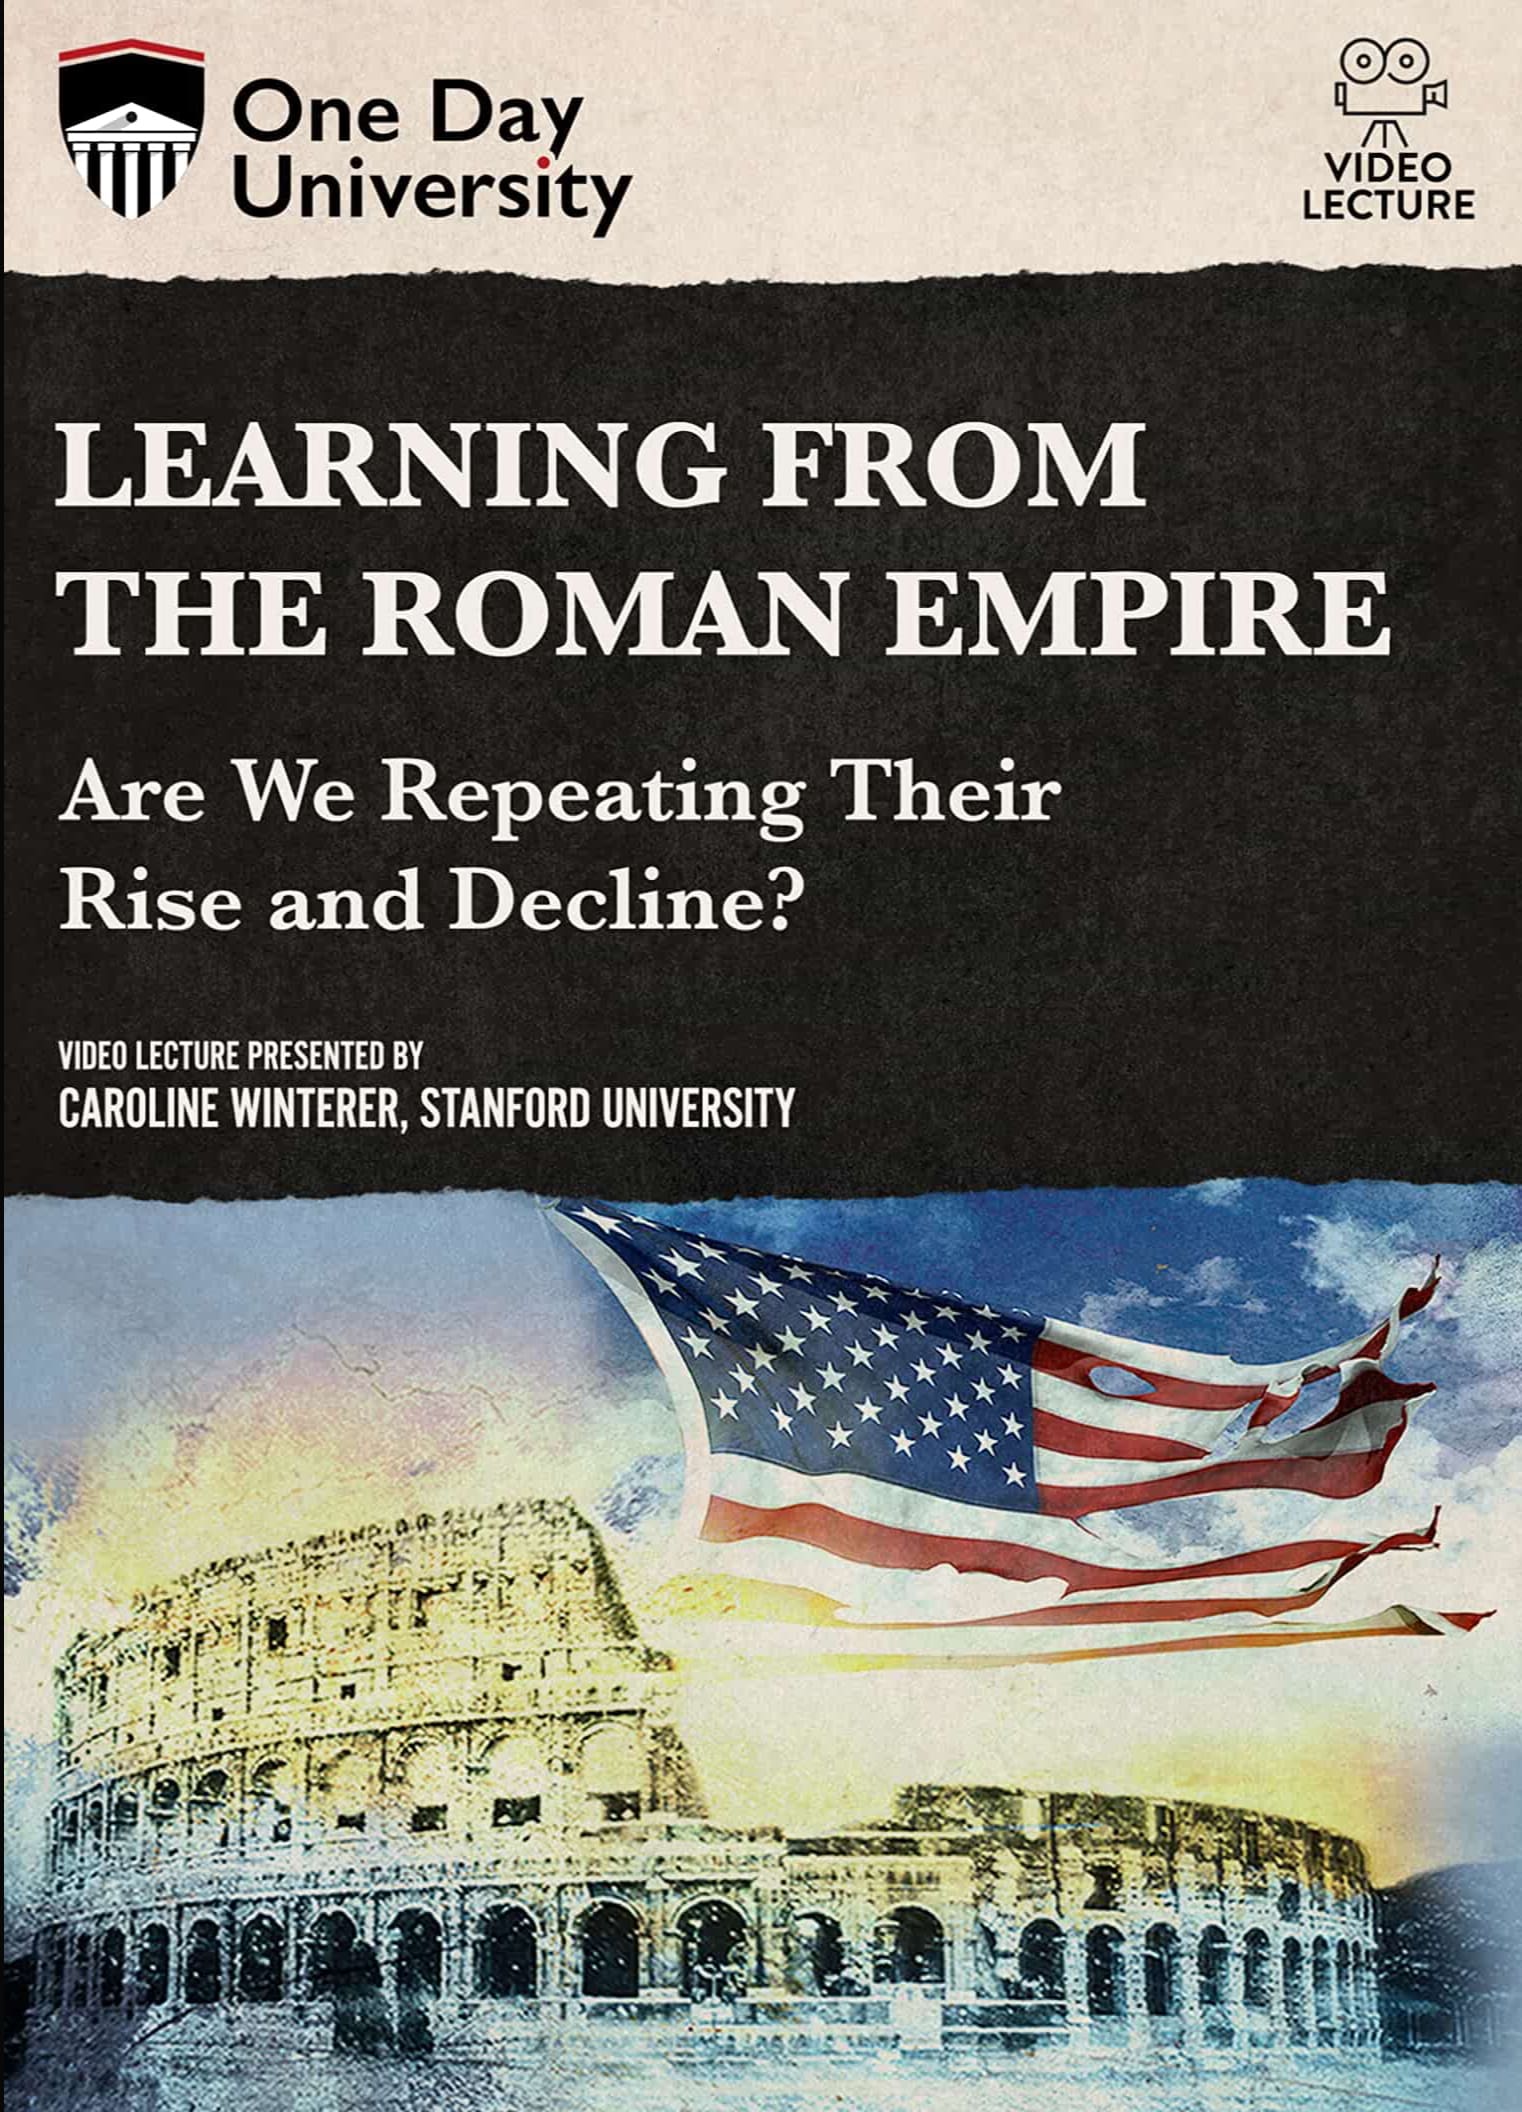 Learning from the Roman Empire: Are We Repeating Their Rise and Decline?